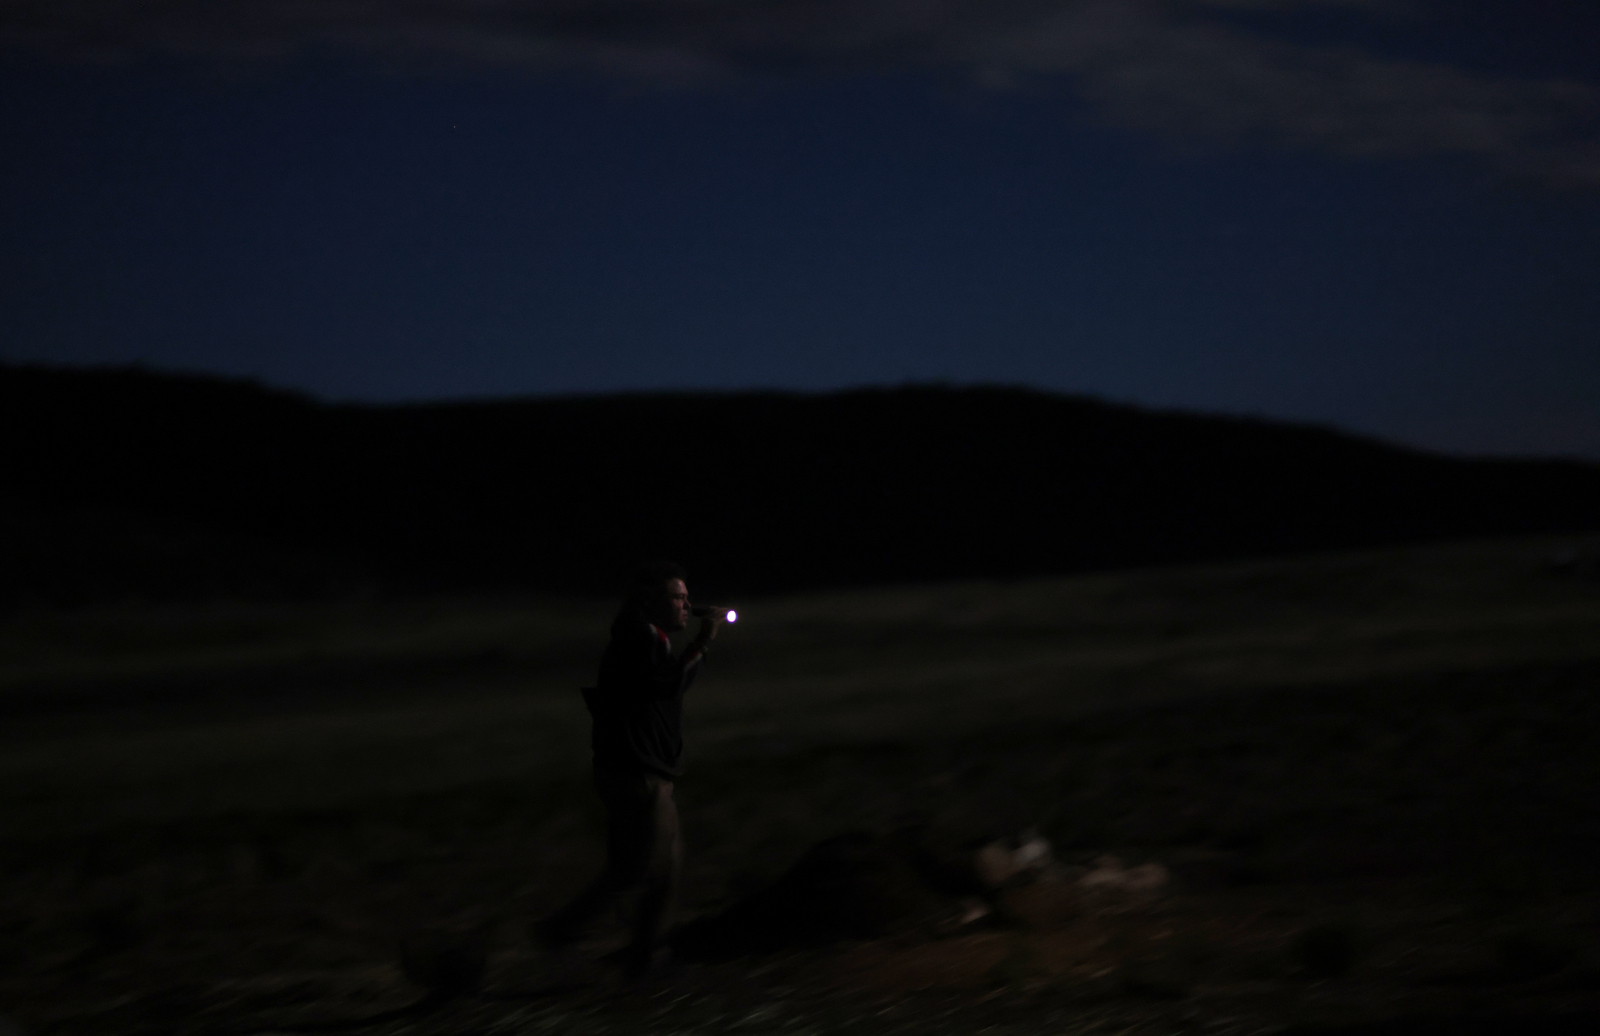 Daisy Hand does a nightly patrol around the Tenacious Unicorn Ranch. The ranchers had restarted nightly patrols after a news media article about them was published and they saw an uptick in threats of physical violence. 